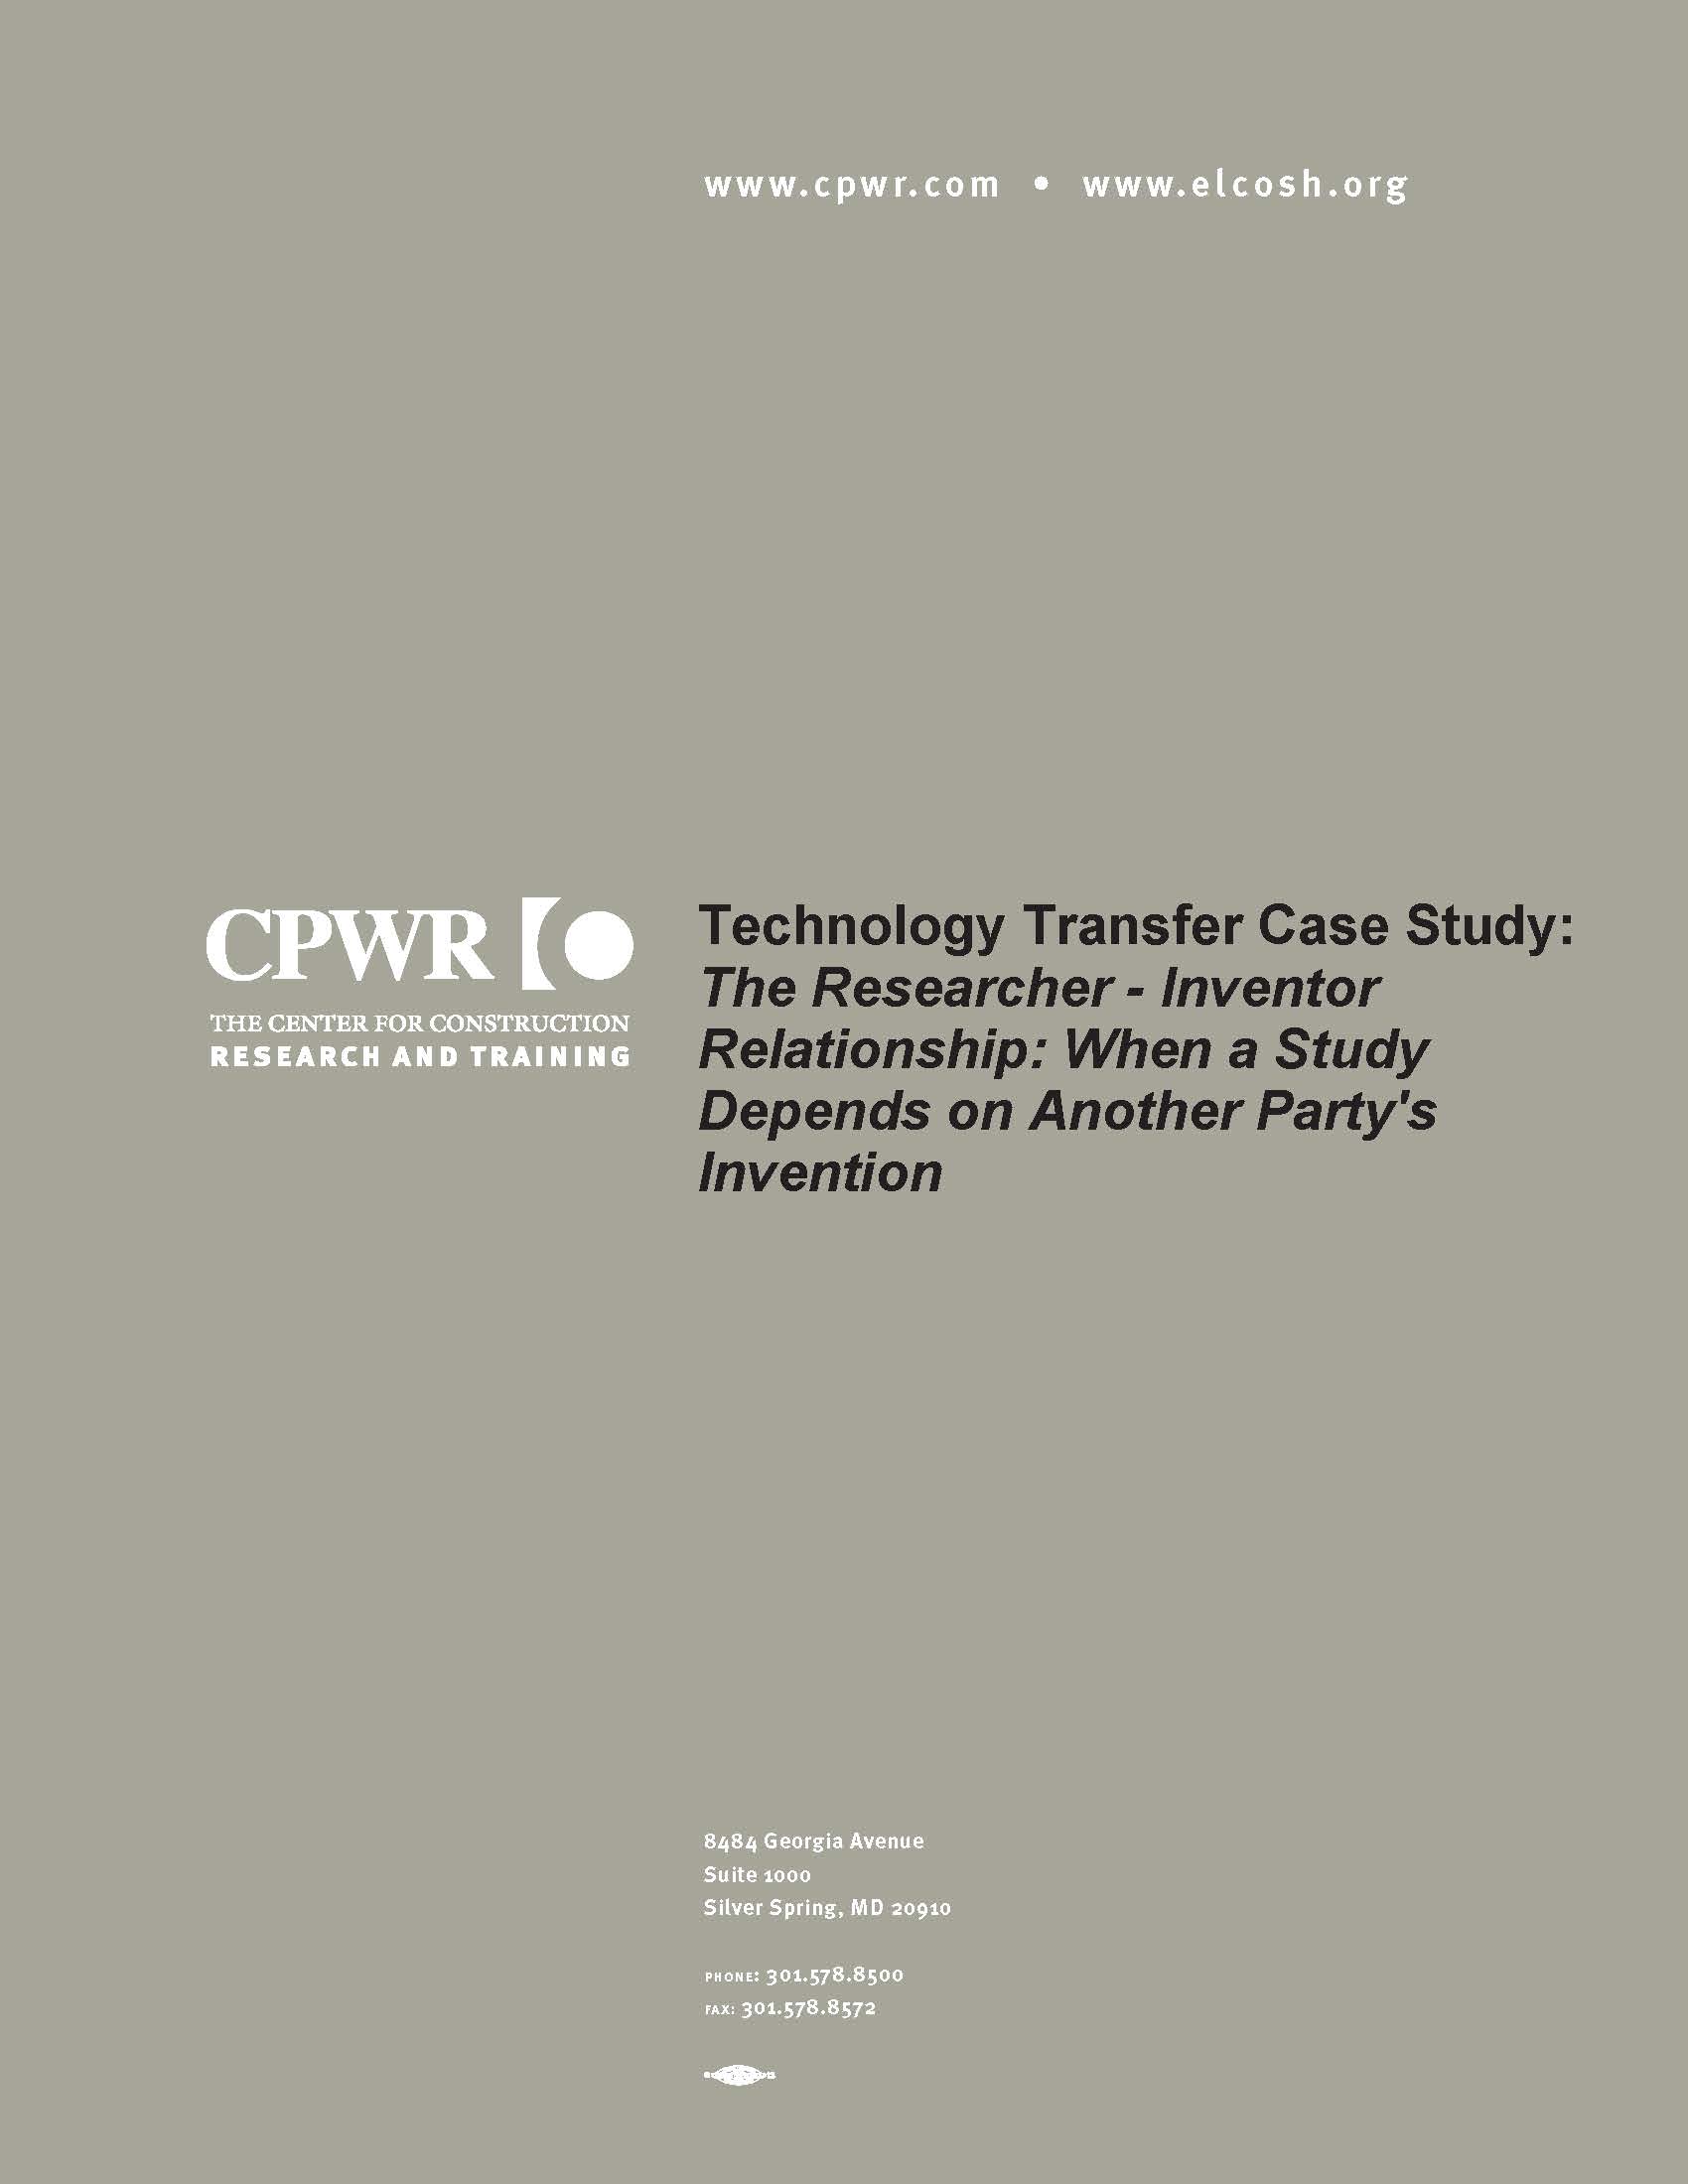 Tech Transfer Case study the Researcher-Inventor Relationship